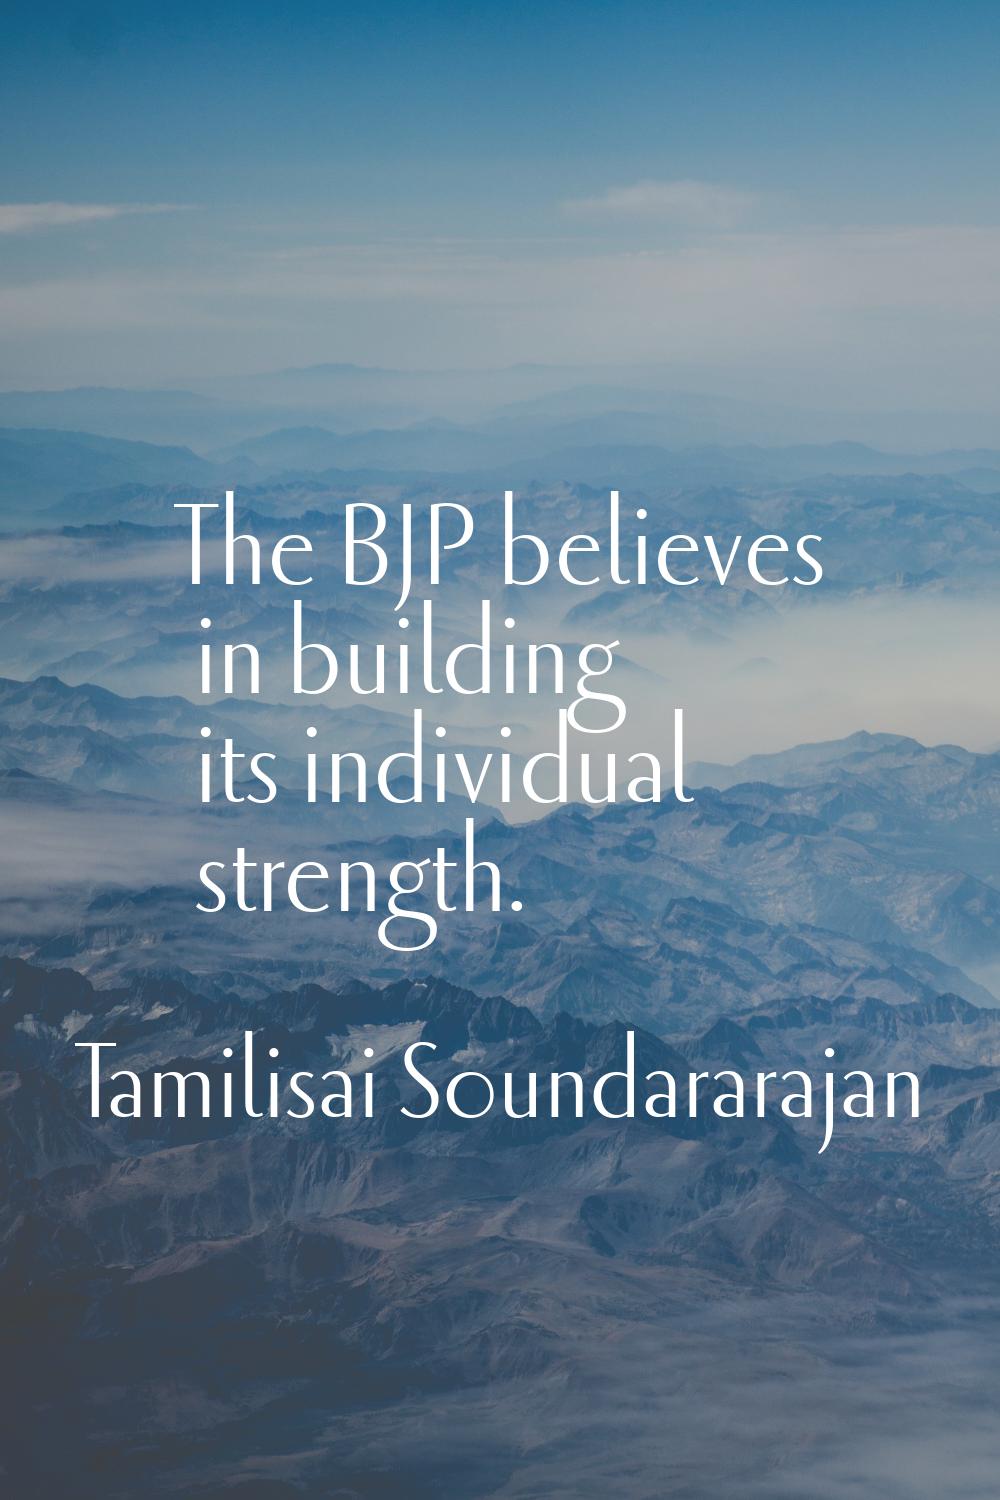 The BJP believes in building its individual strength.